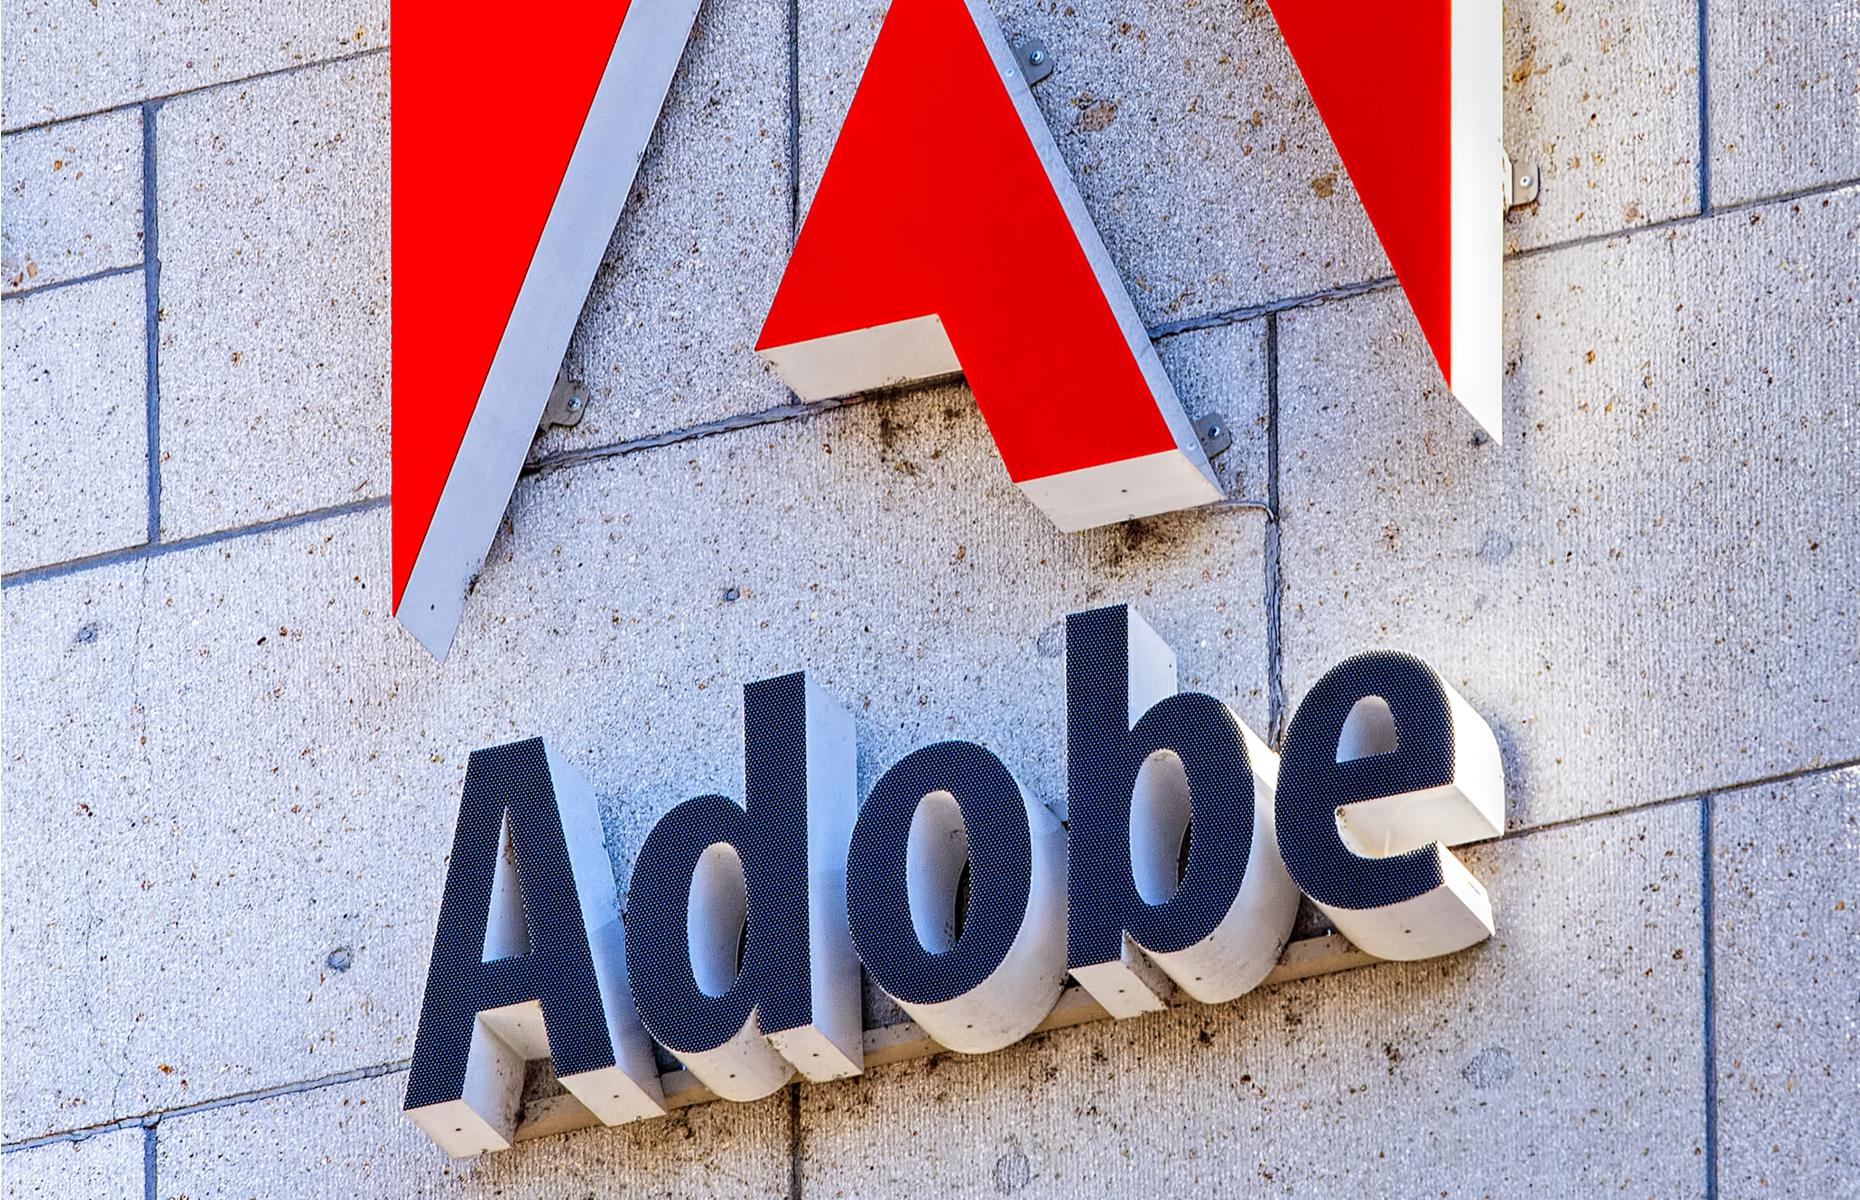 4. Adobe Systems Incorporated